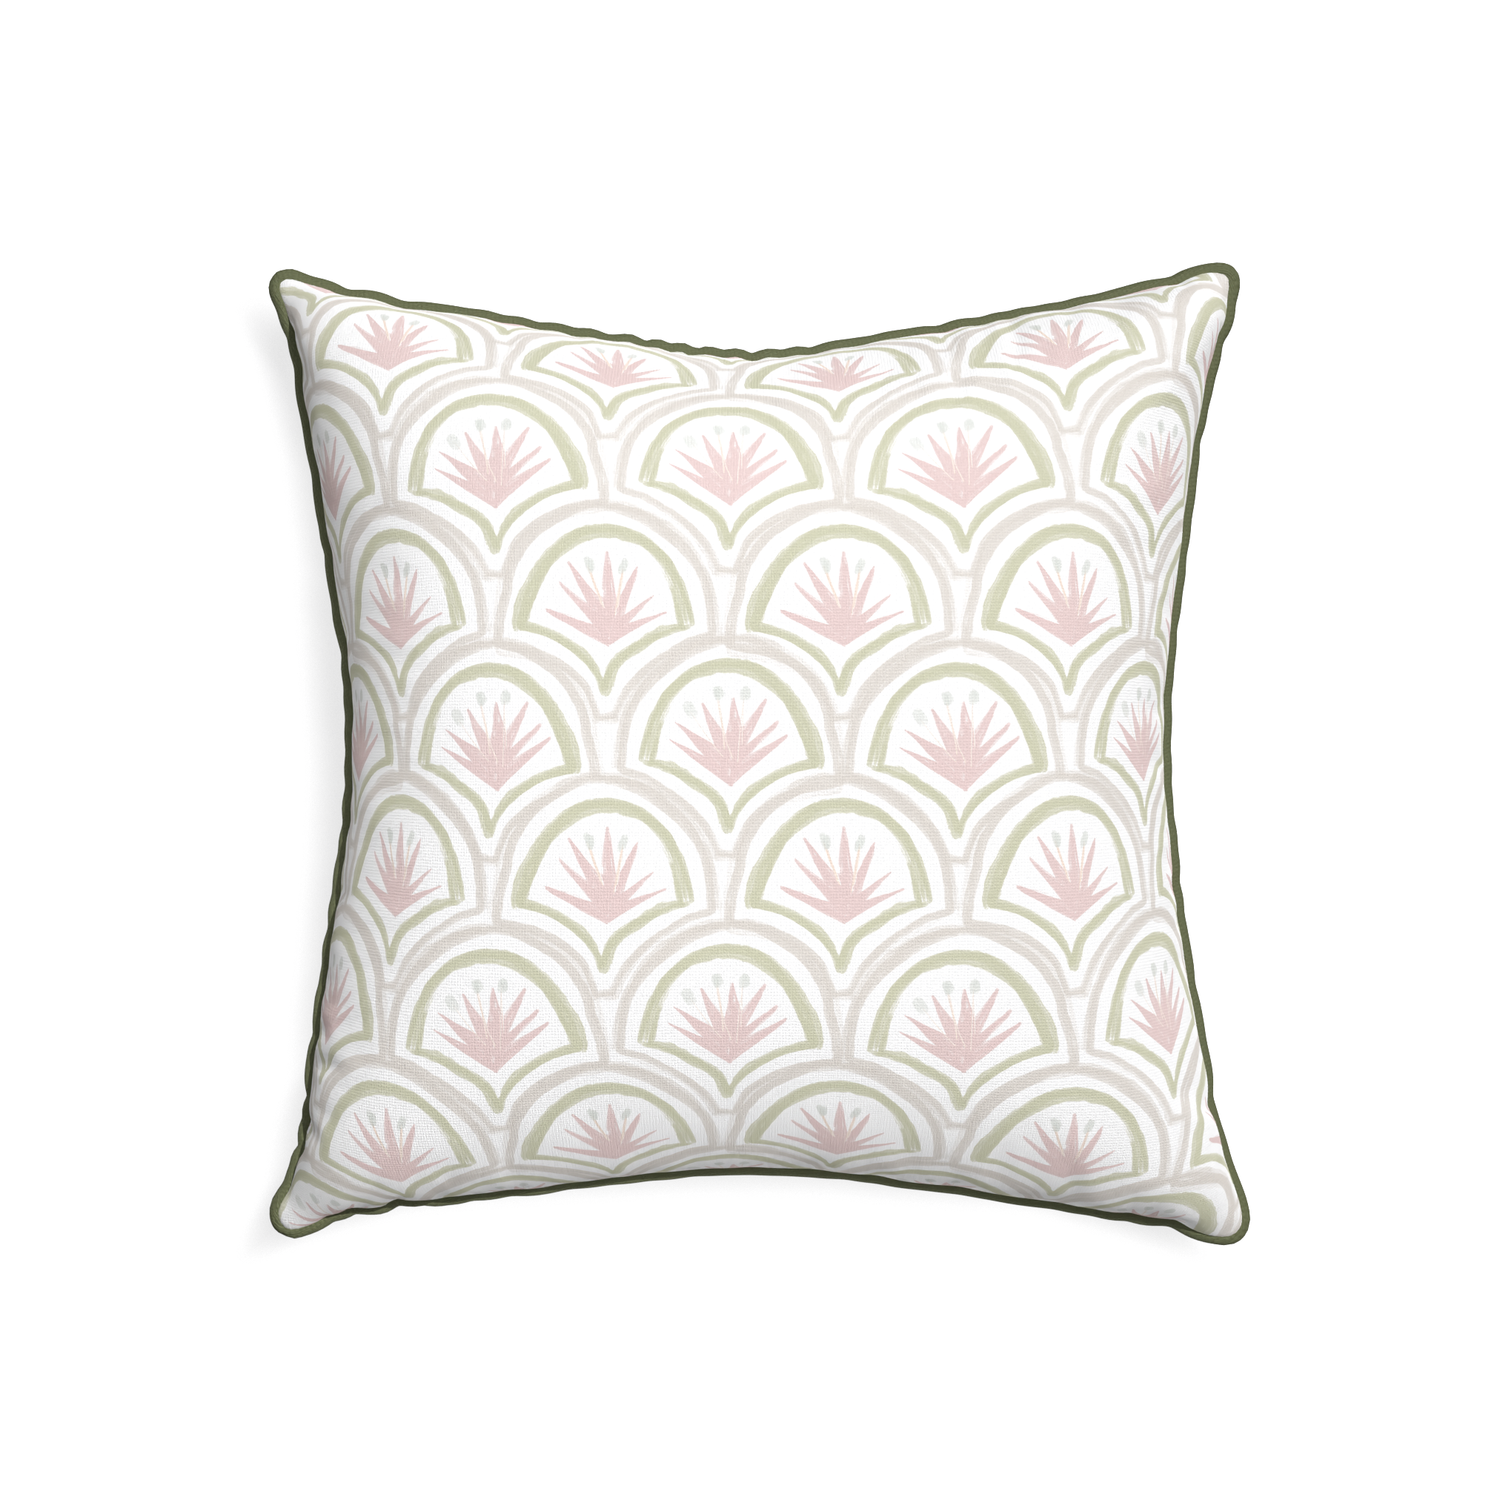 22-square thatcher rose custom pillow with f piping on white background